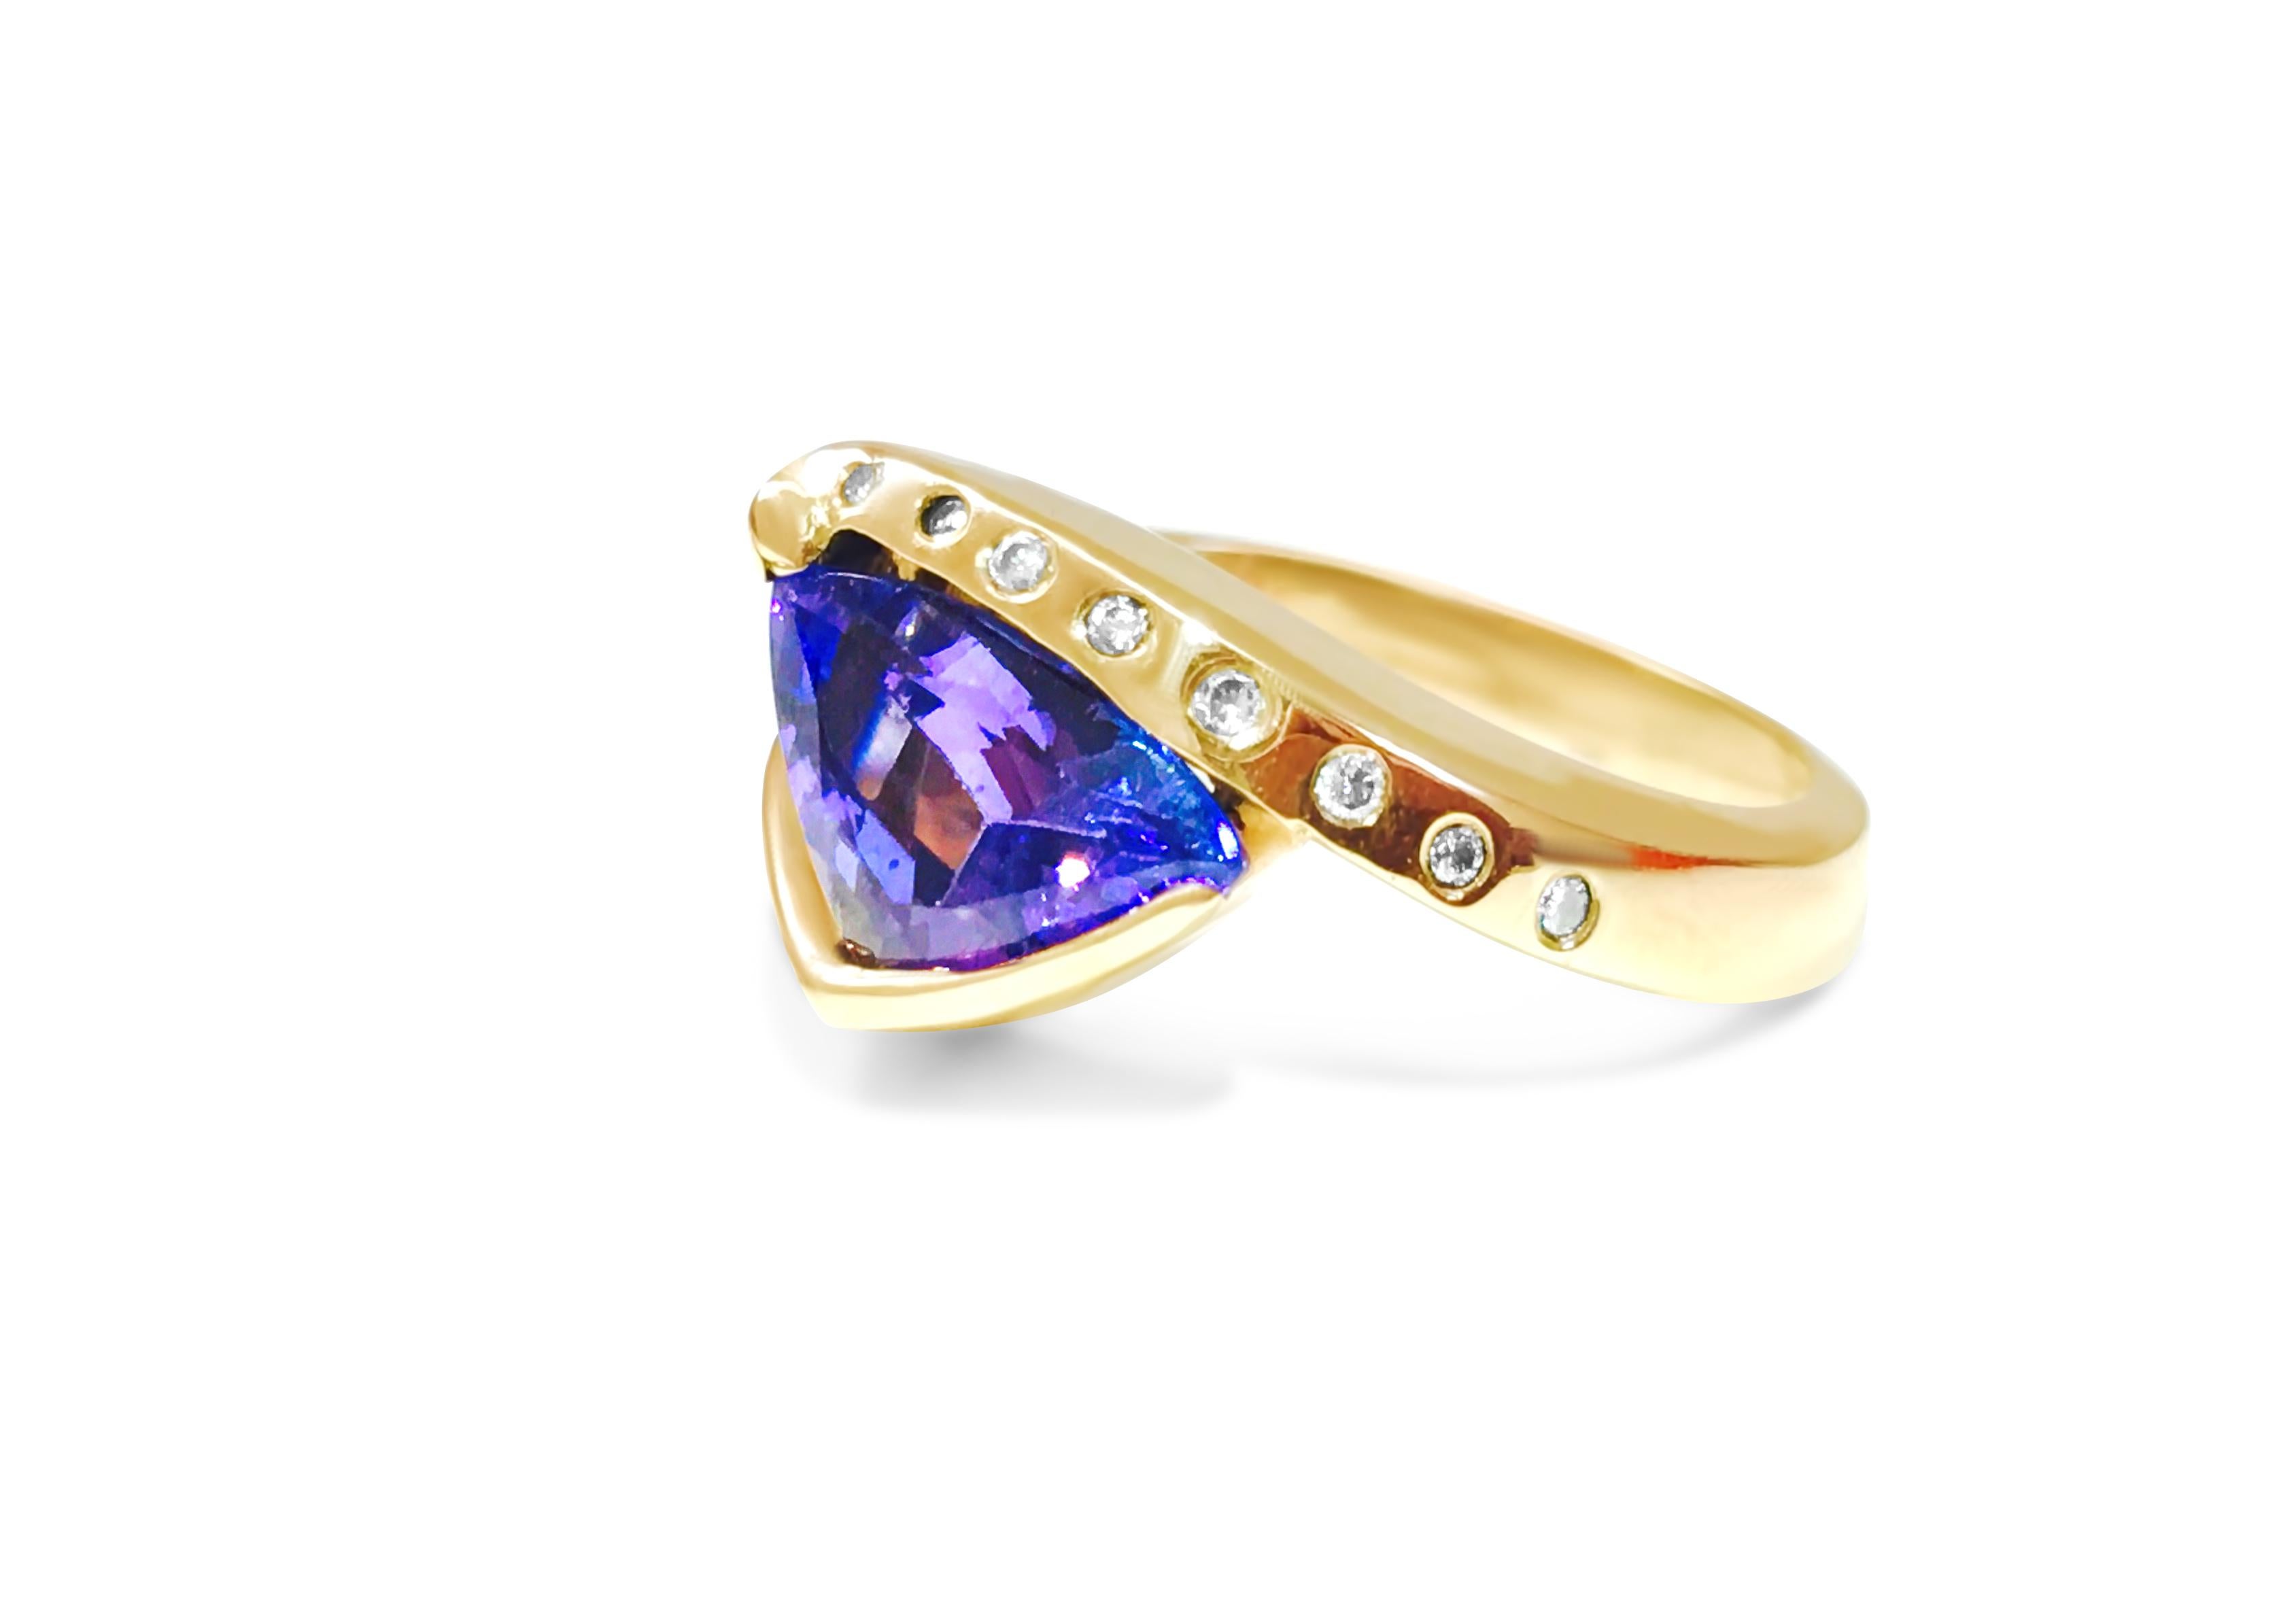 Metal: 14k Yellow Gold. 

Fancy cut tanzanite. 100% natural earth mined. 

0.30 cwt (approx). Round brilliant cut diamonds. VS-SI clarity and G color.

Tanzanite is a rare stone. Tanzanite is only found in Tanzania, in a very small mining area near